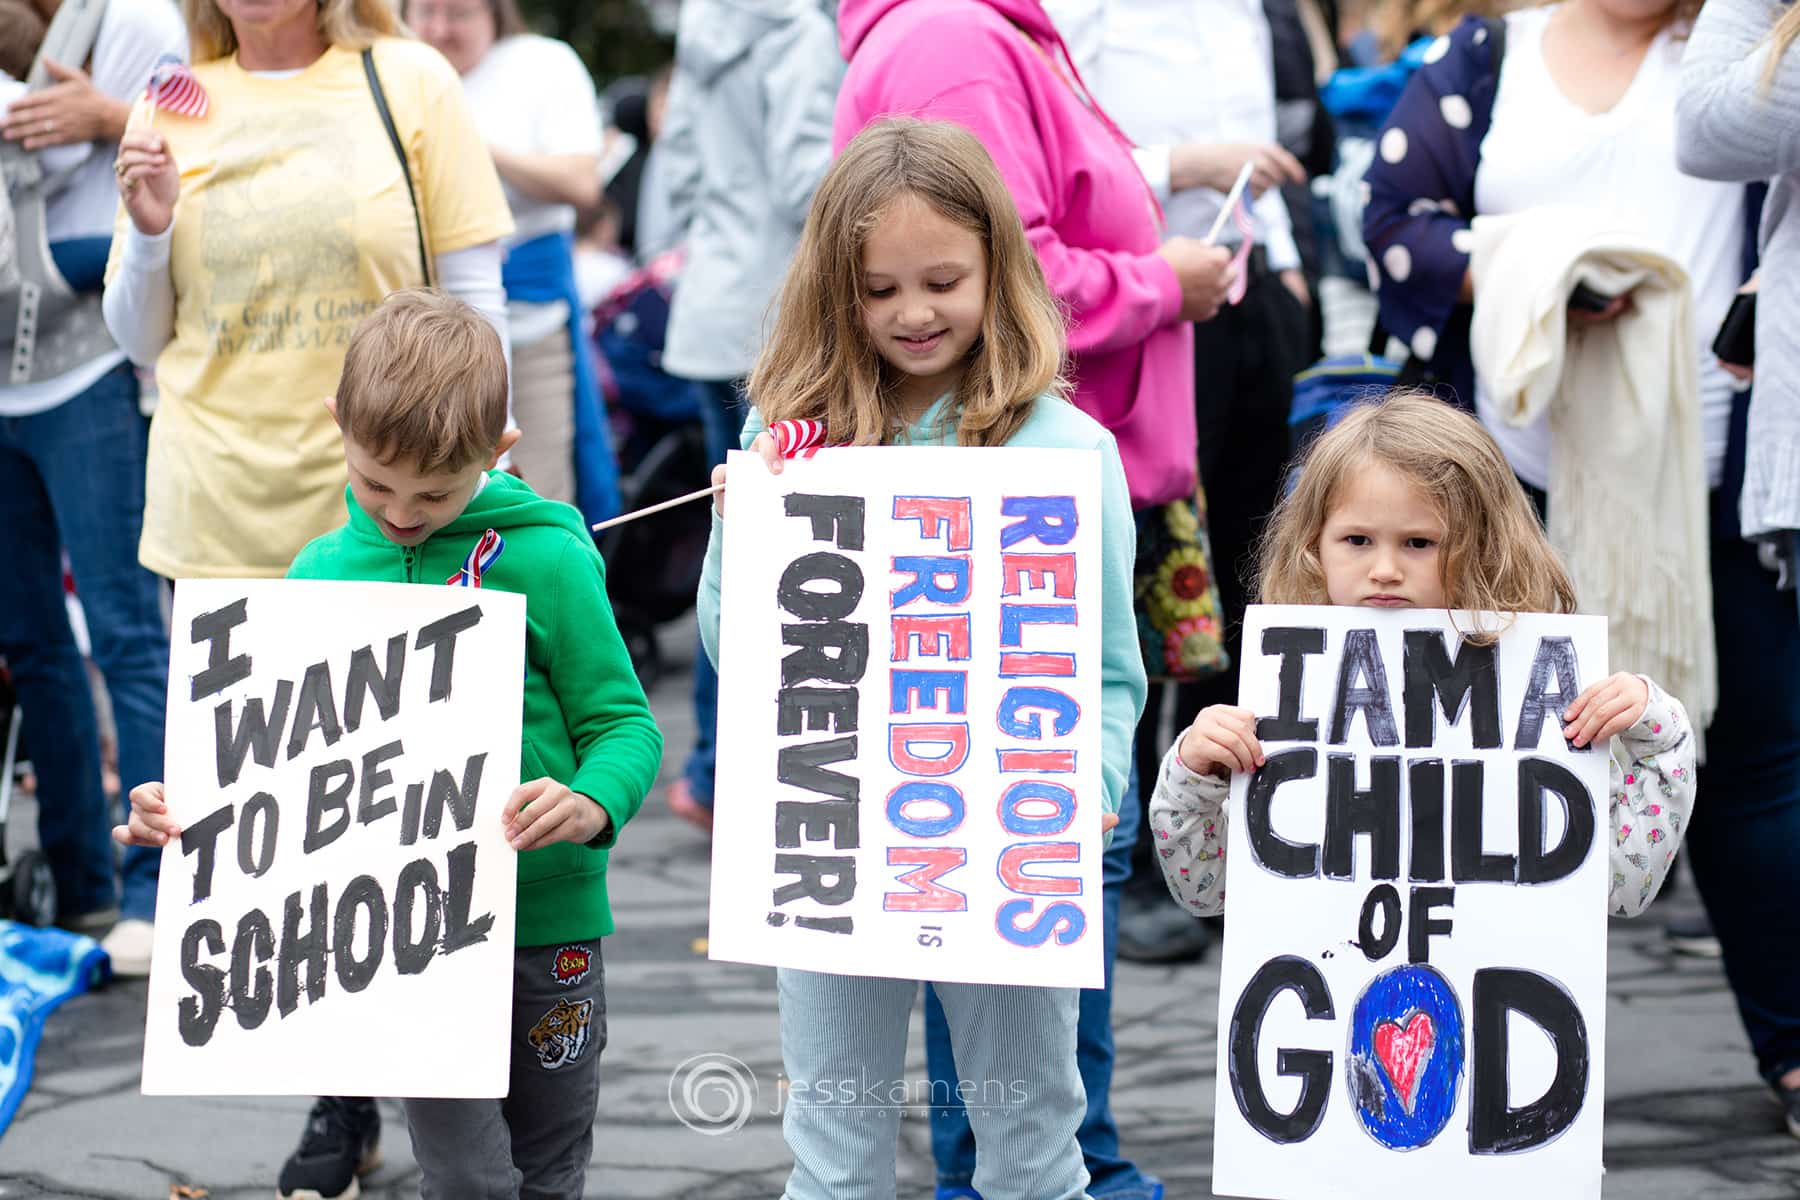 Children hold signs expression their wish for freedom and to be in school